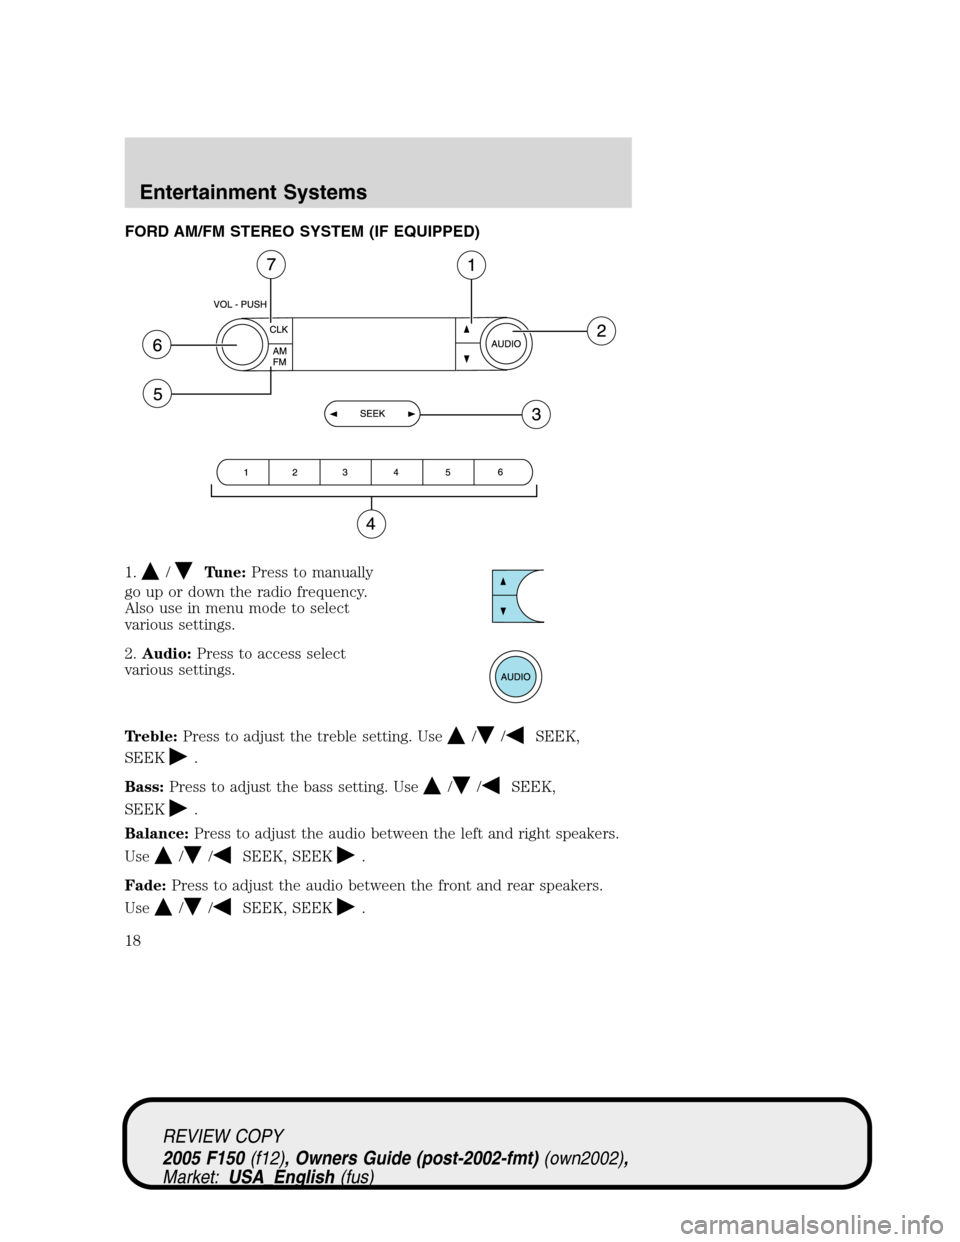 FORD F150 2005 11.G Owners Manual FORD AM/FM STEREO SYSTEM (IF EQUIPPED)
1.
/Tune:Press to manually
go up or down the radio frequency.
Also use in menu mode to select
various settings.
2.Audio:Press to access select
various settings.
